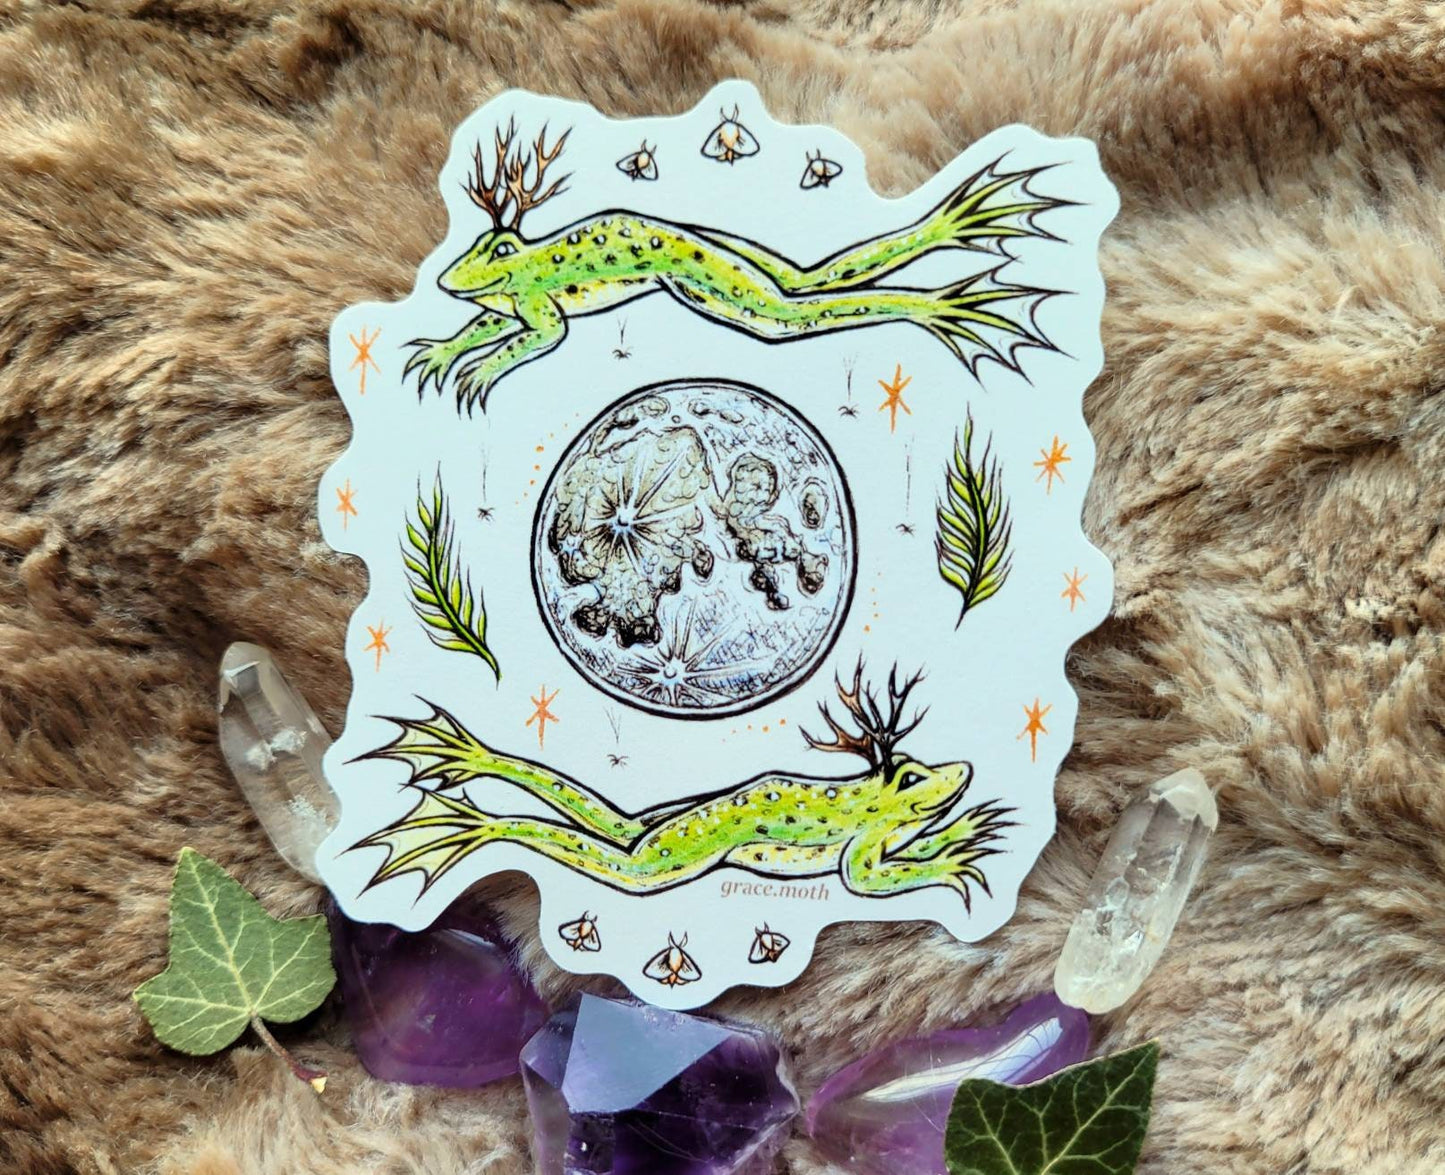 Frog Dance - Vinyl Sticker 10cm by 8cm - Illustrated by Grace moth. Frogs, moon magic, witchy, cottagecore, fantasy, folklore, fairy